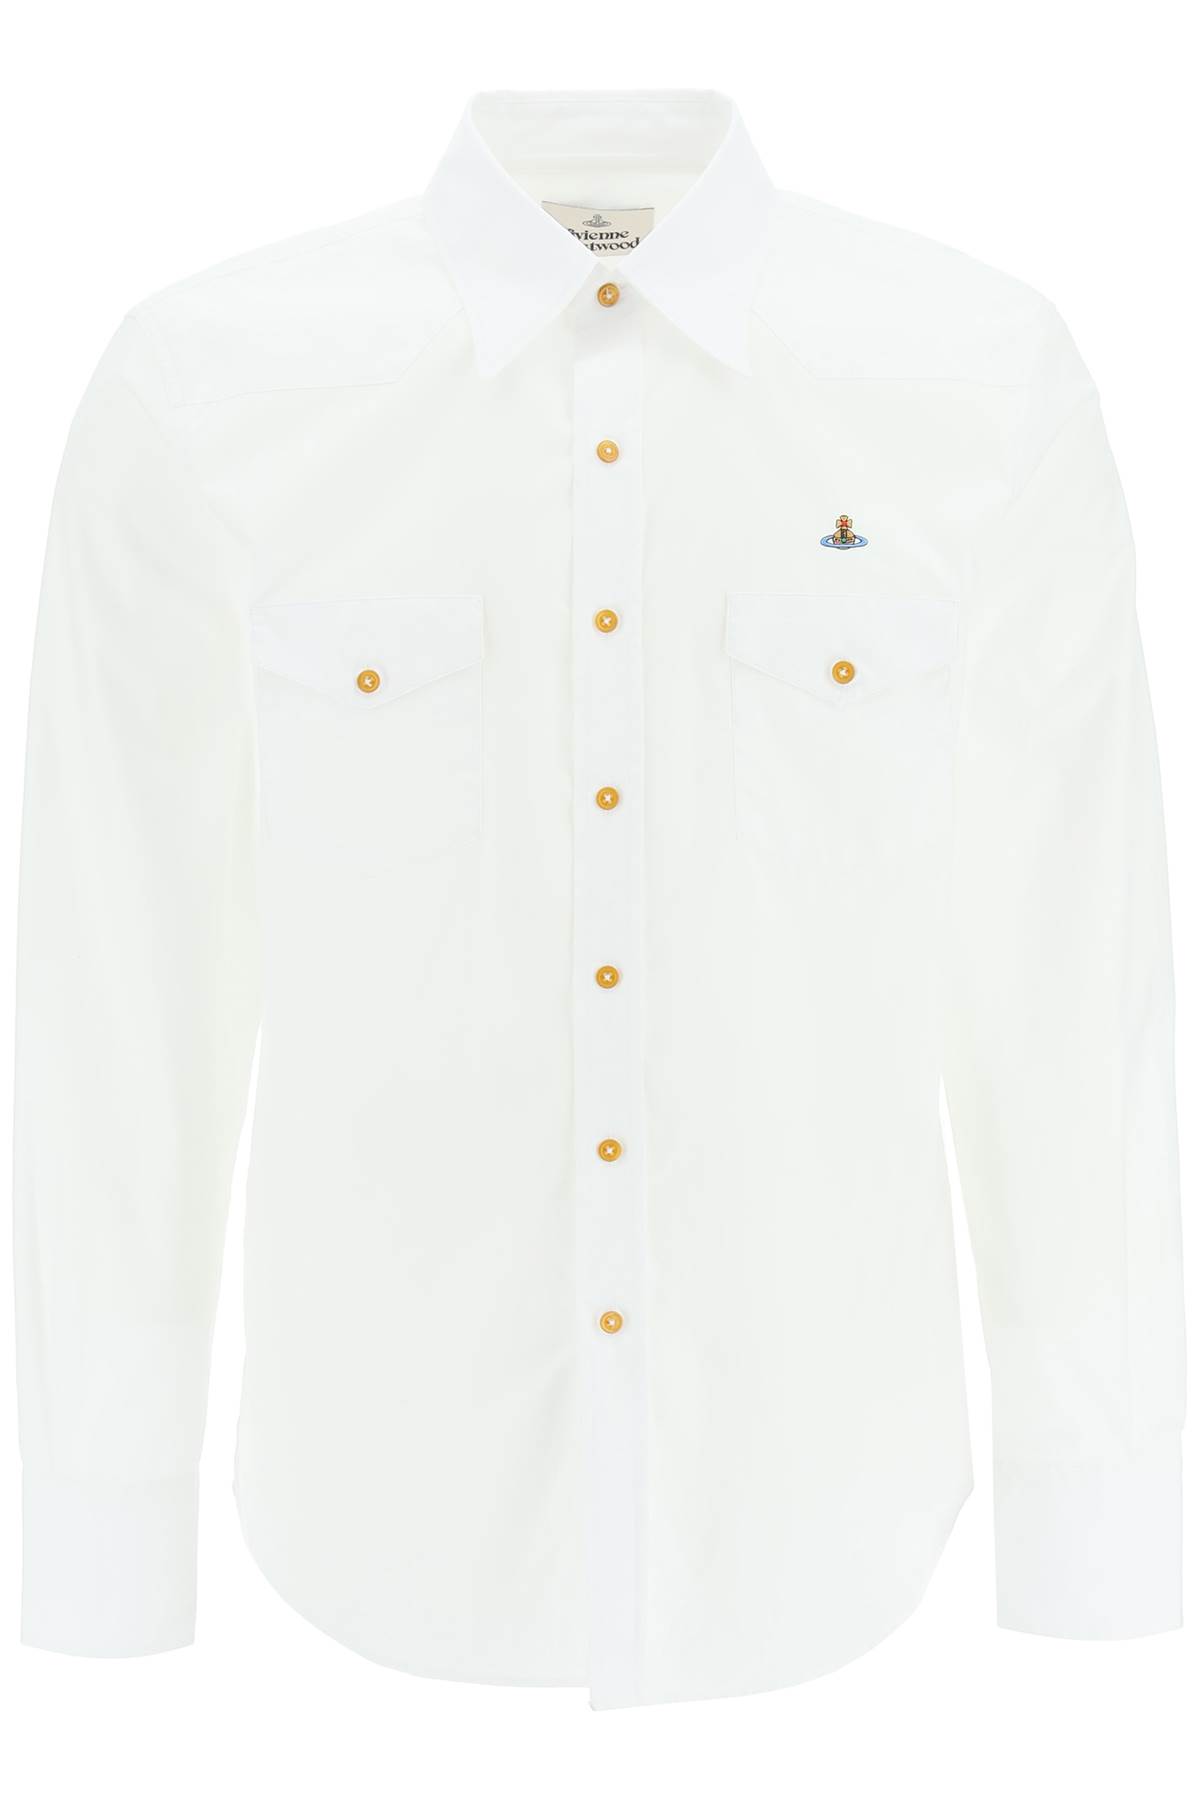 VIVIENNE WESTWOOD POPLIN SHIRT WITH CHEST POCKETS AND ORB EMBROIDERY